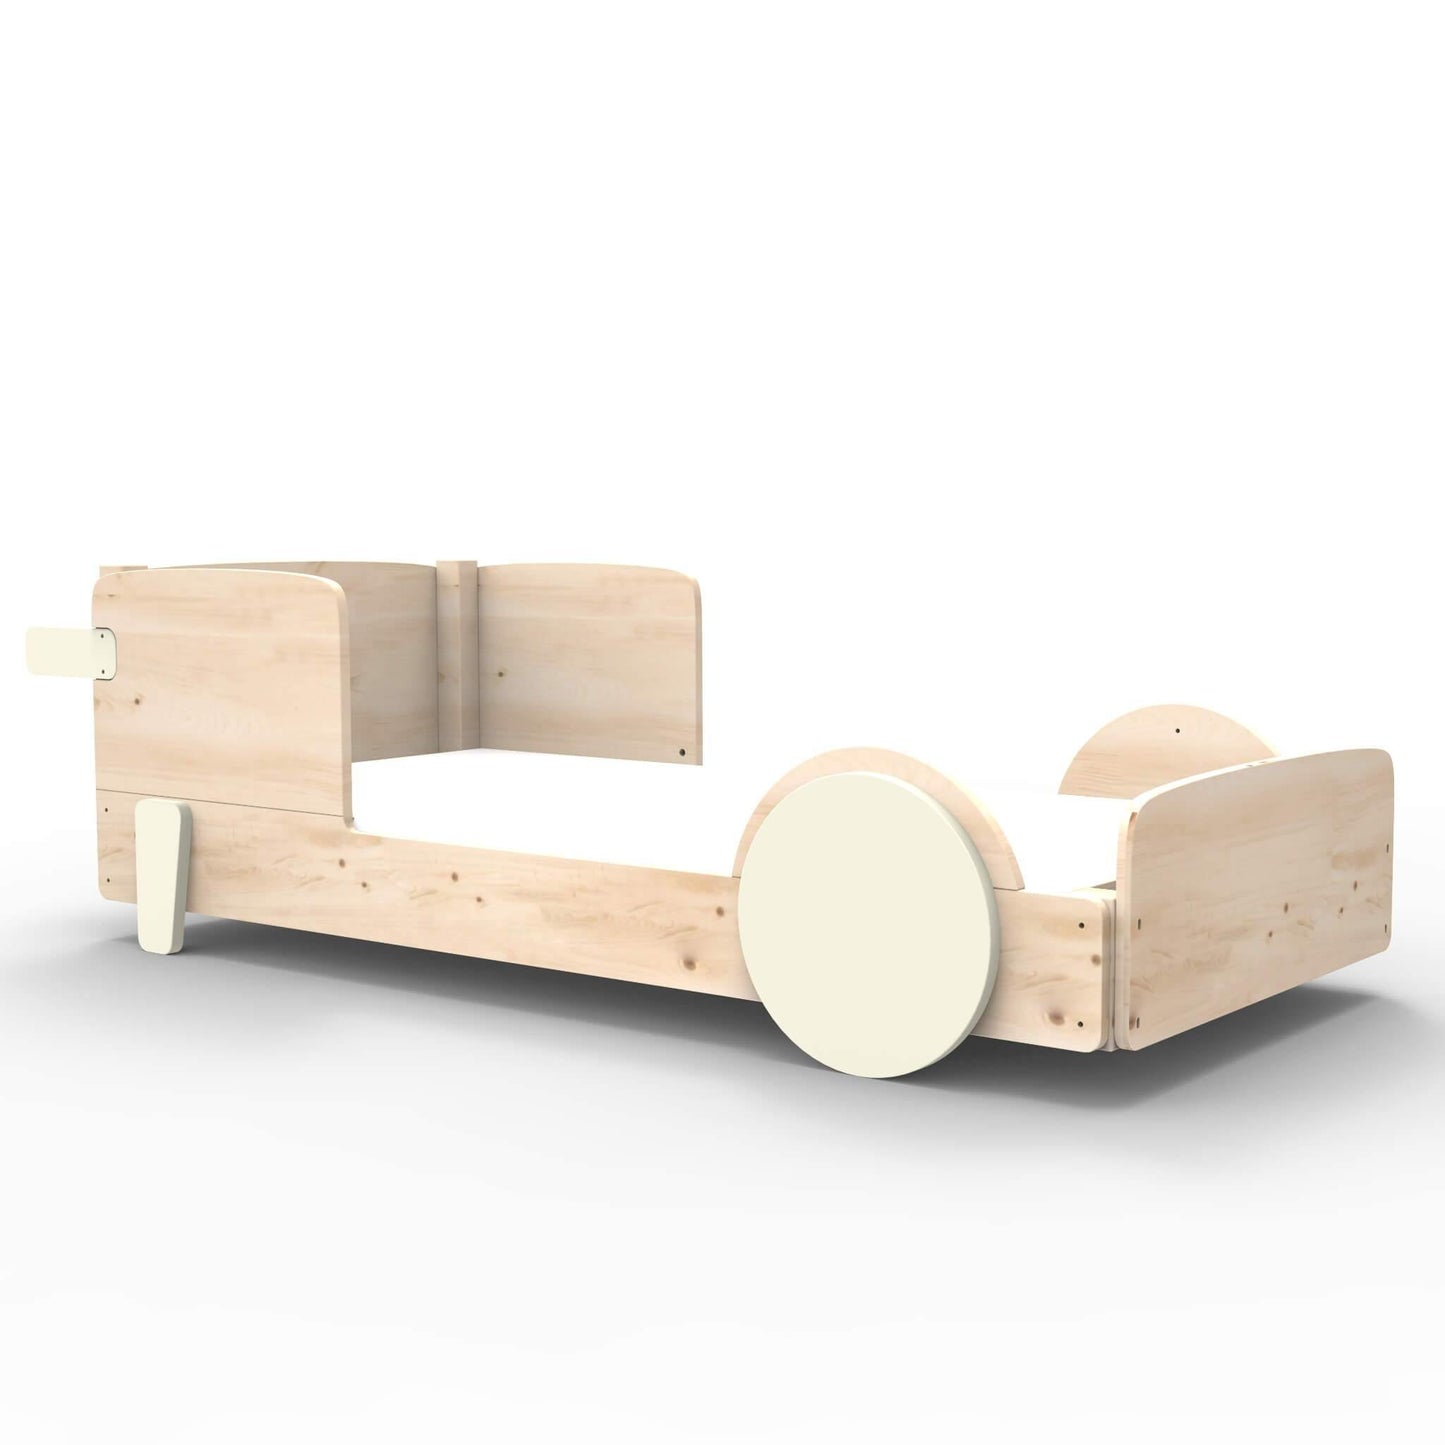 Mathy By Bols Discovery Single Bed - Millie & Jones